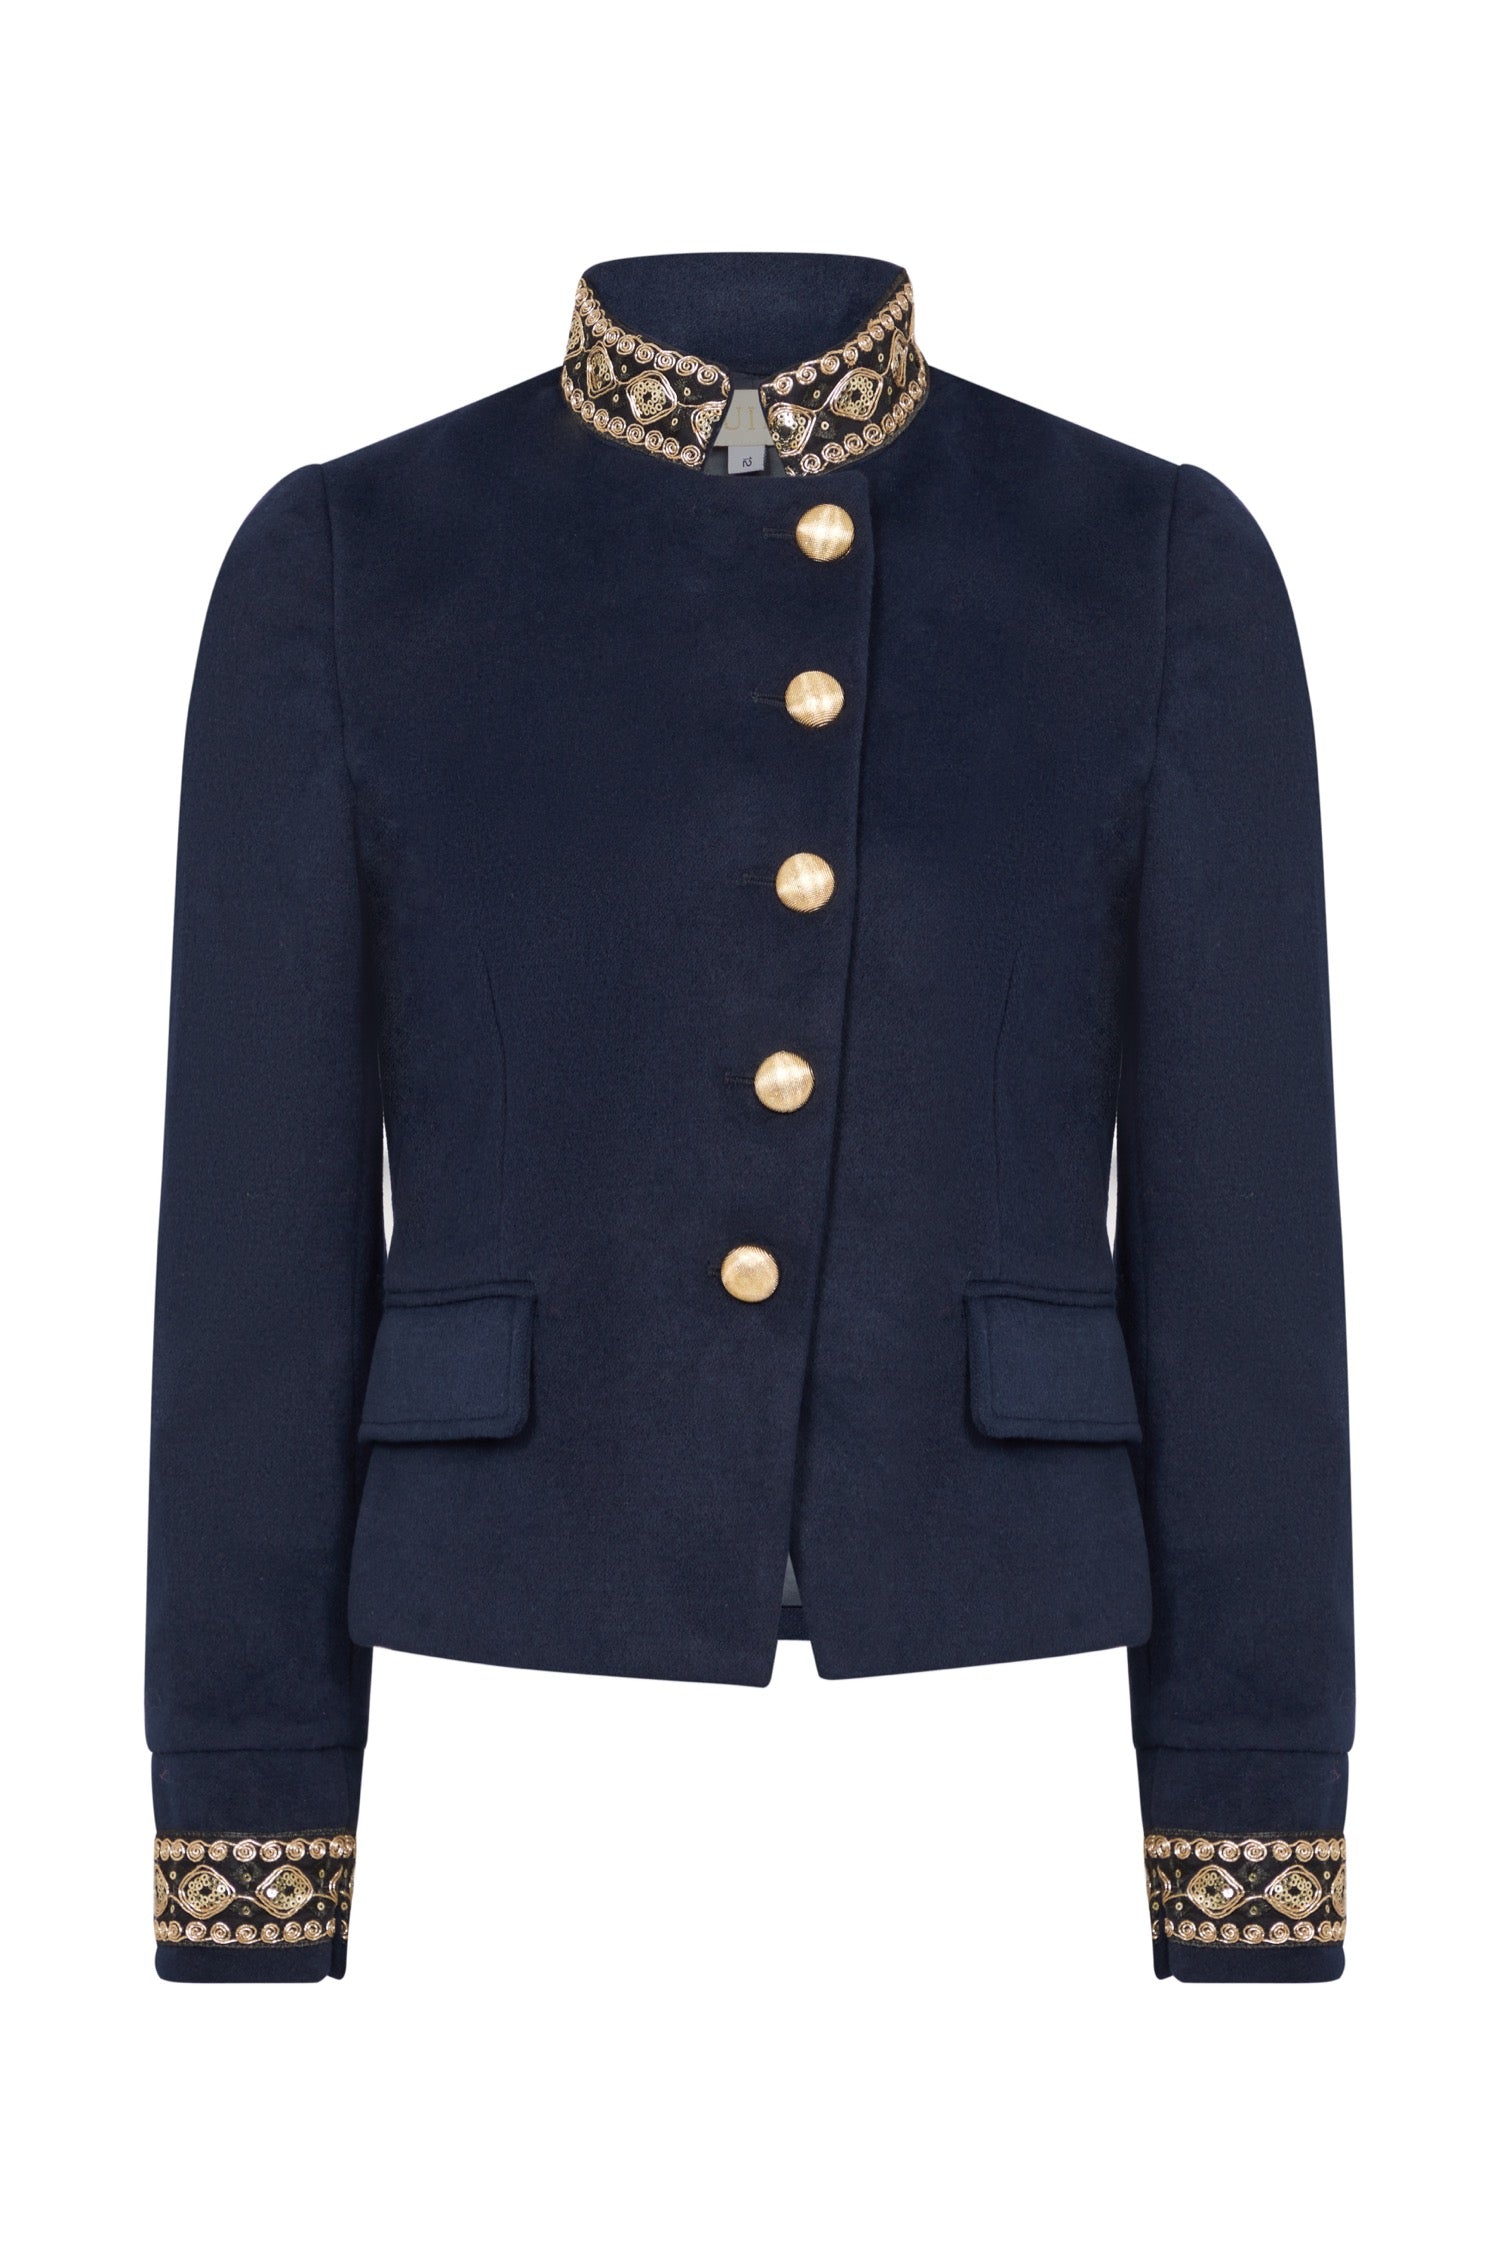 Women’s Gold / Blue Navy Military Jacket With Gold Sequin Braid Details Small Guinea